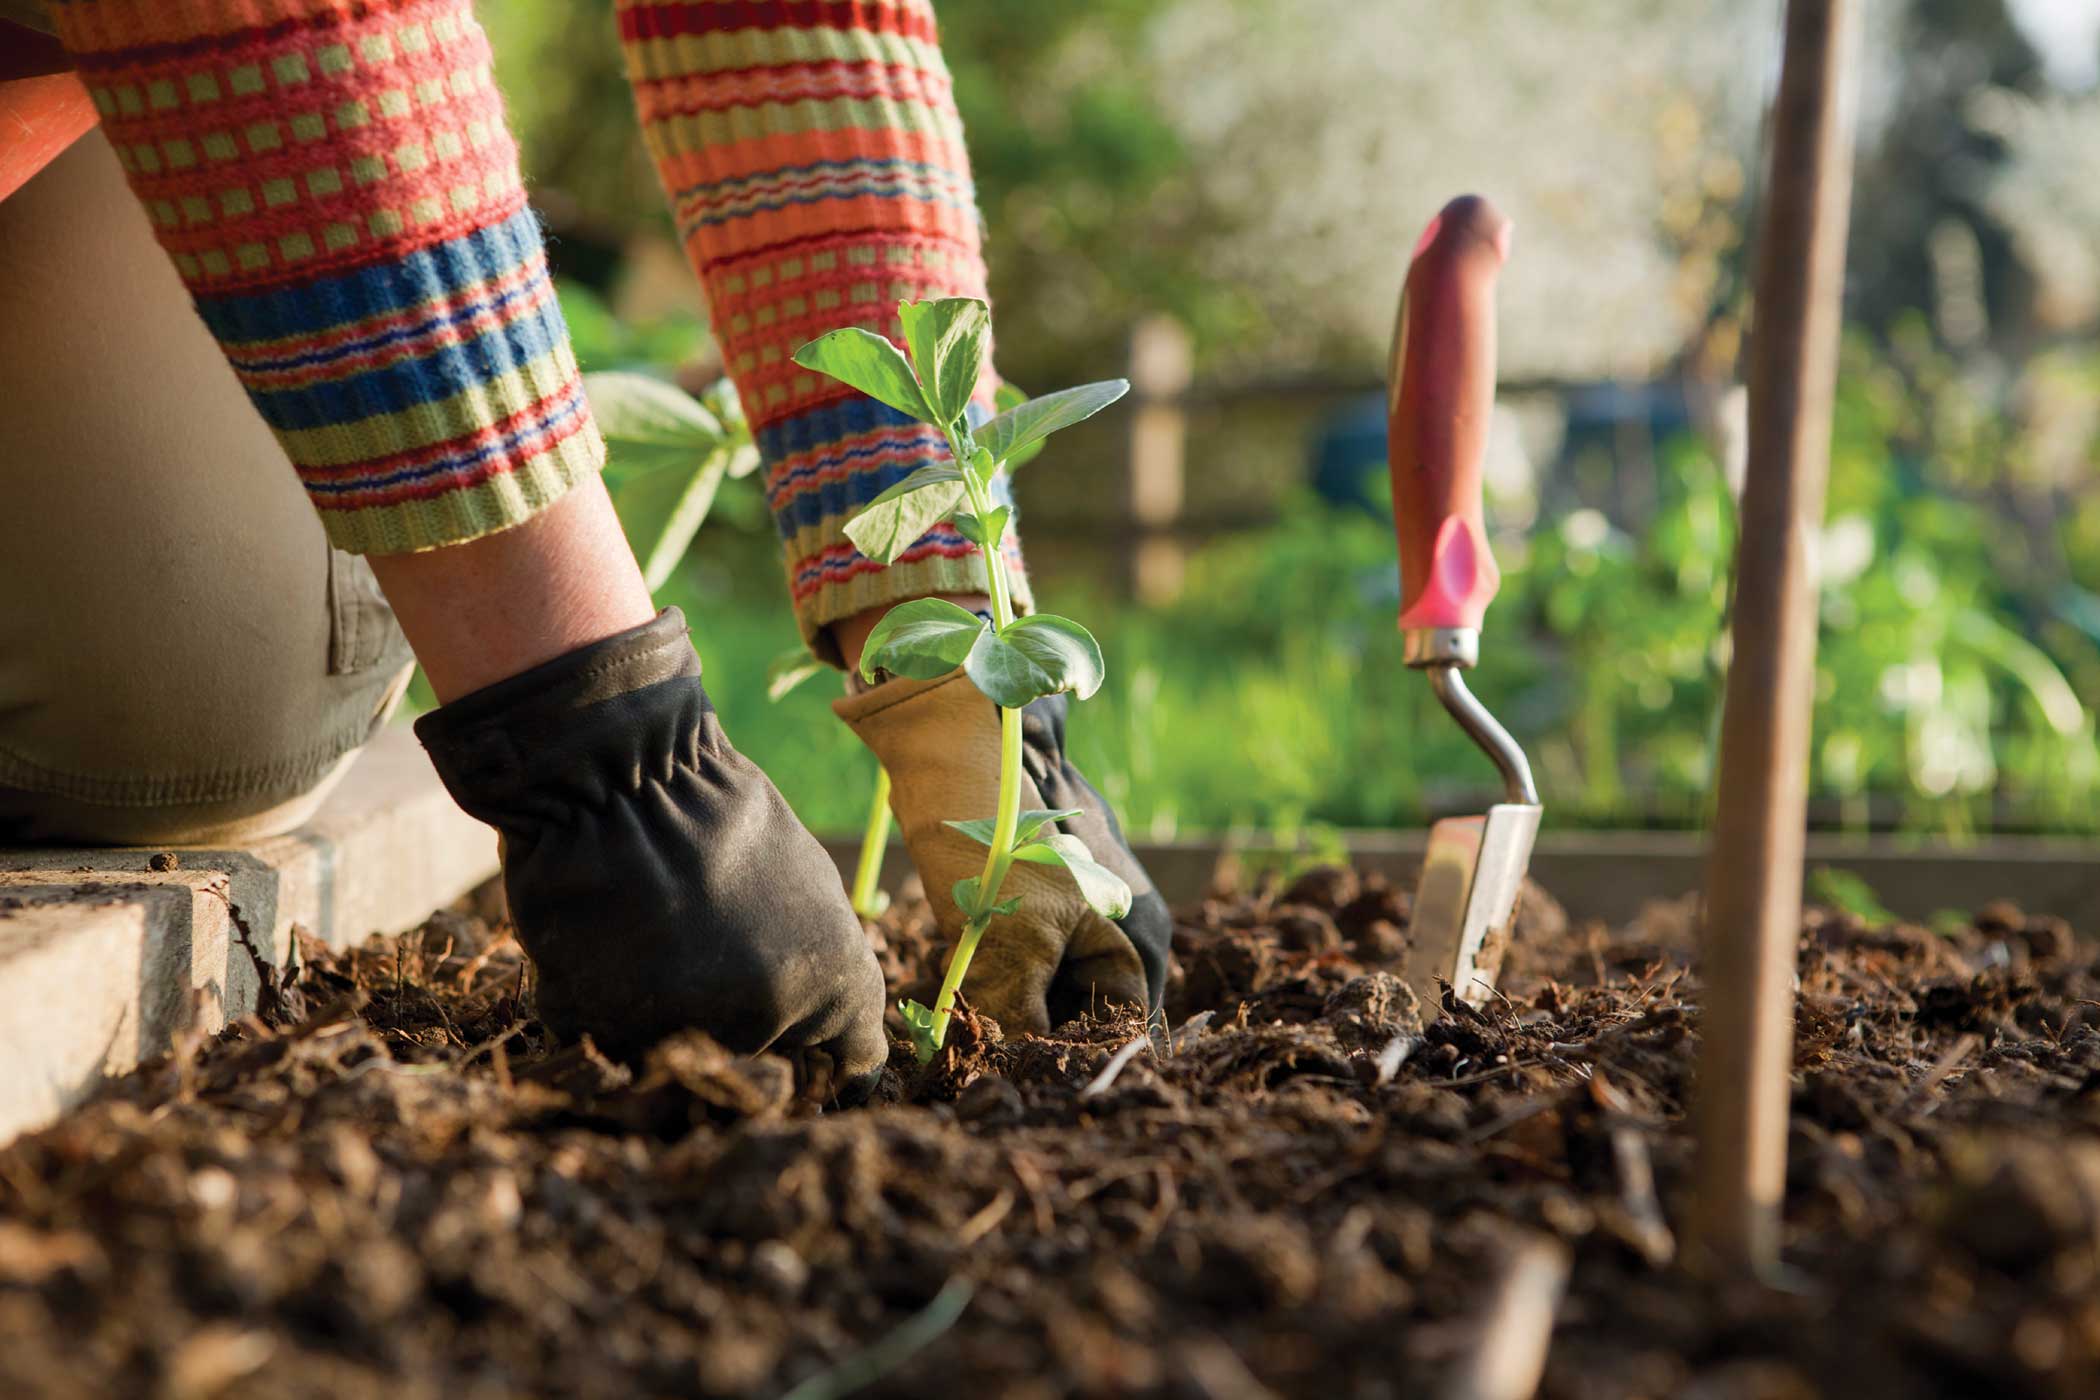 What is Gardening Therapy and why we should start doing it?